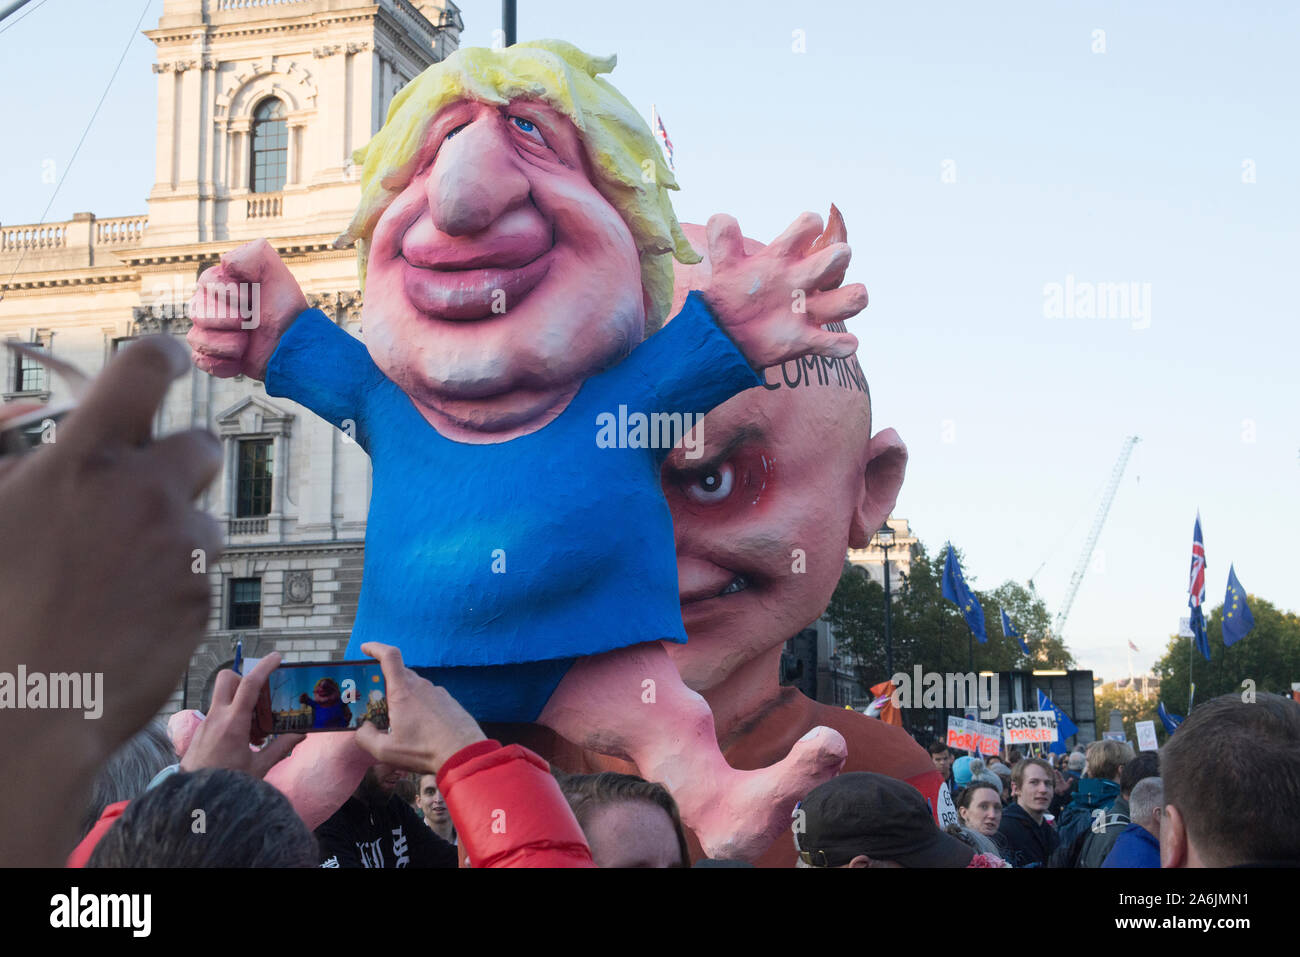 London, UK - 19 October 2019 - Brexit Monstrosity  (Boris-Cummings) created by Jacques Tilly at Parliament Square at the end of the march. Hundreds of thousands of people from right across the UK join a march and rally to support “Giving the people a final say” on Brexit. This was organised by the Peoples Vote campaign to get a Referendum on the final Brexit deal with an option to remain inside the EU. Starting in Park Lane, the march ended in Parliament Square where there were speeches from leading campaigners. More info: www.peoples-vote.uk and www.letusbeheard.uk - credit Bruce Tanner Stock Photo